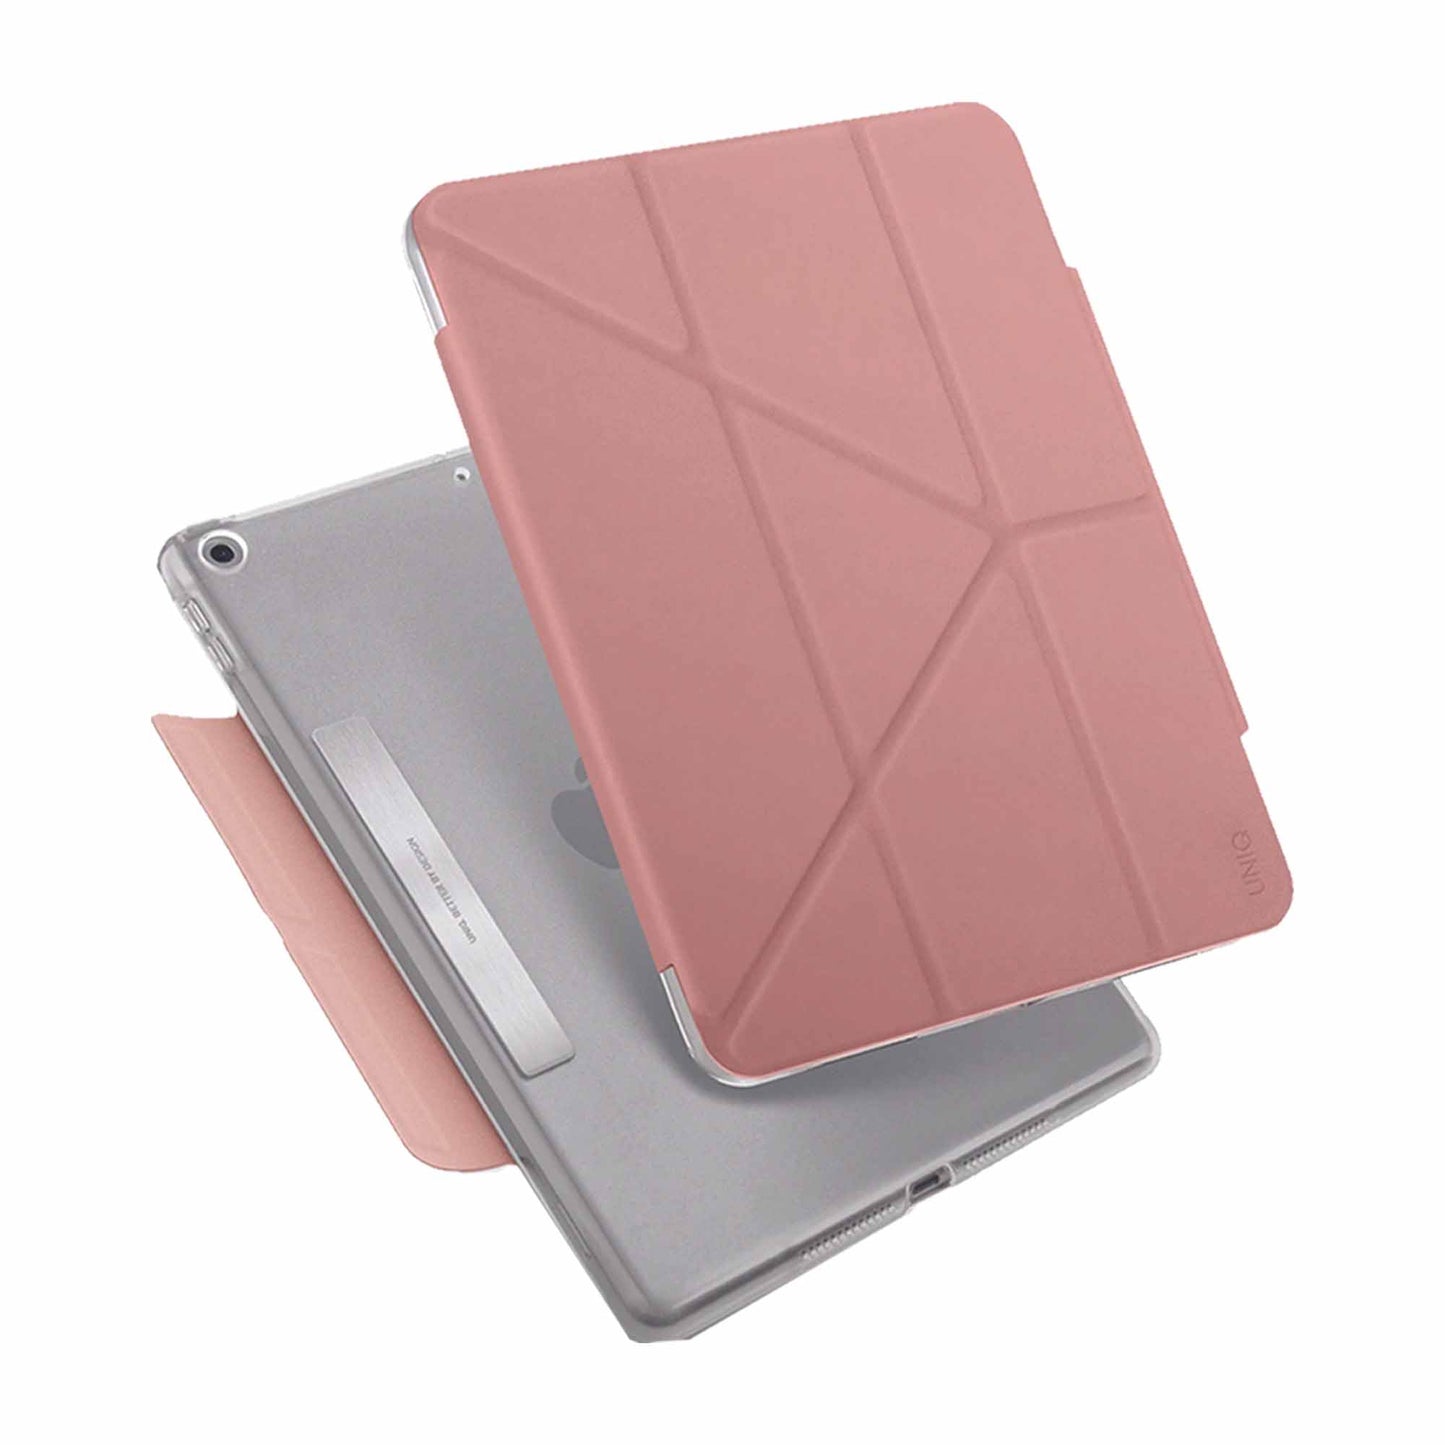 UNIQ Camden Case for iPad 10.2 ( 9th Gen - 2021 ) - Antimicrobial Case - Peony Pink (Barcode: 8886463679371 )